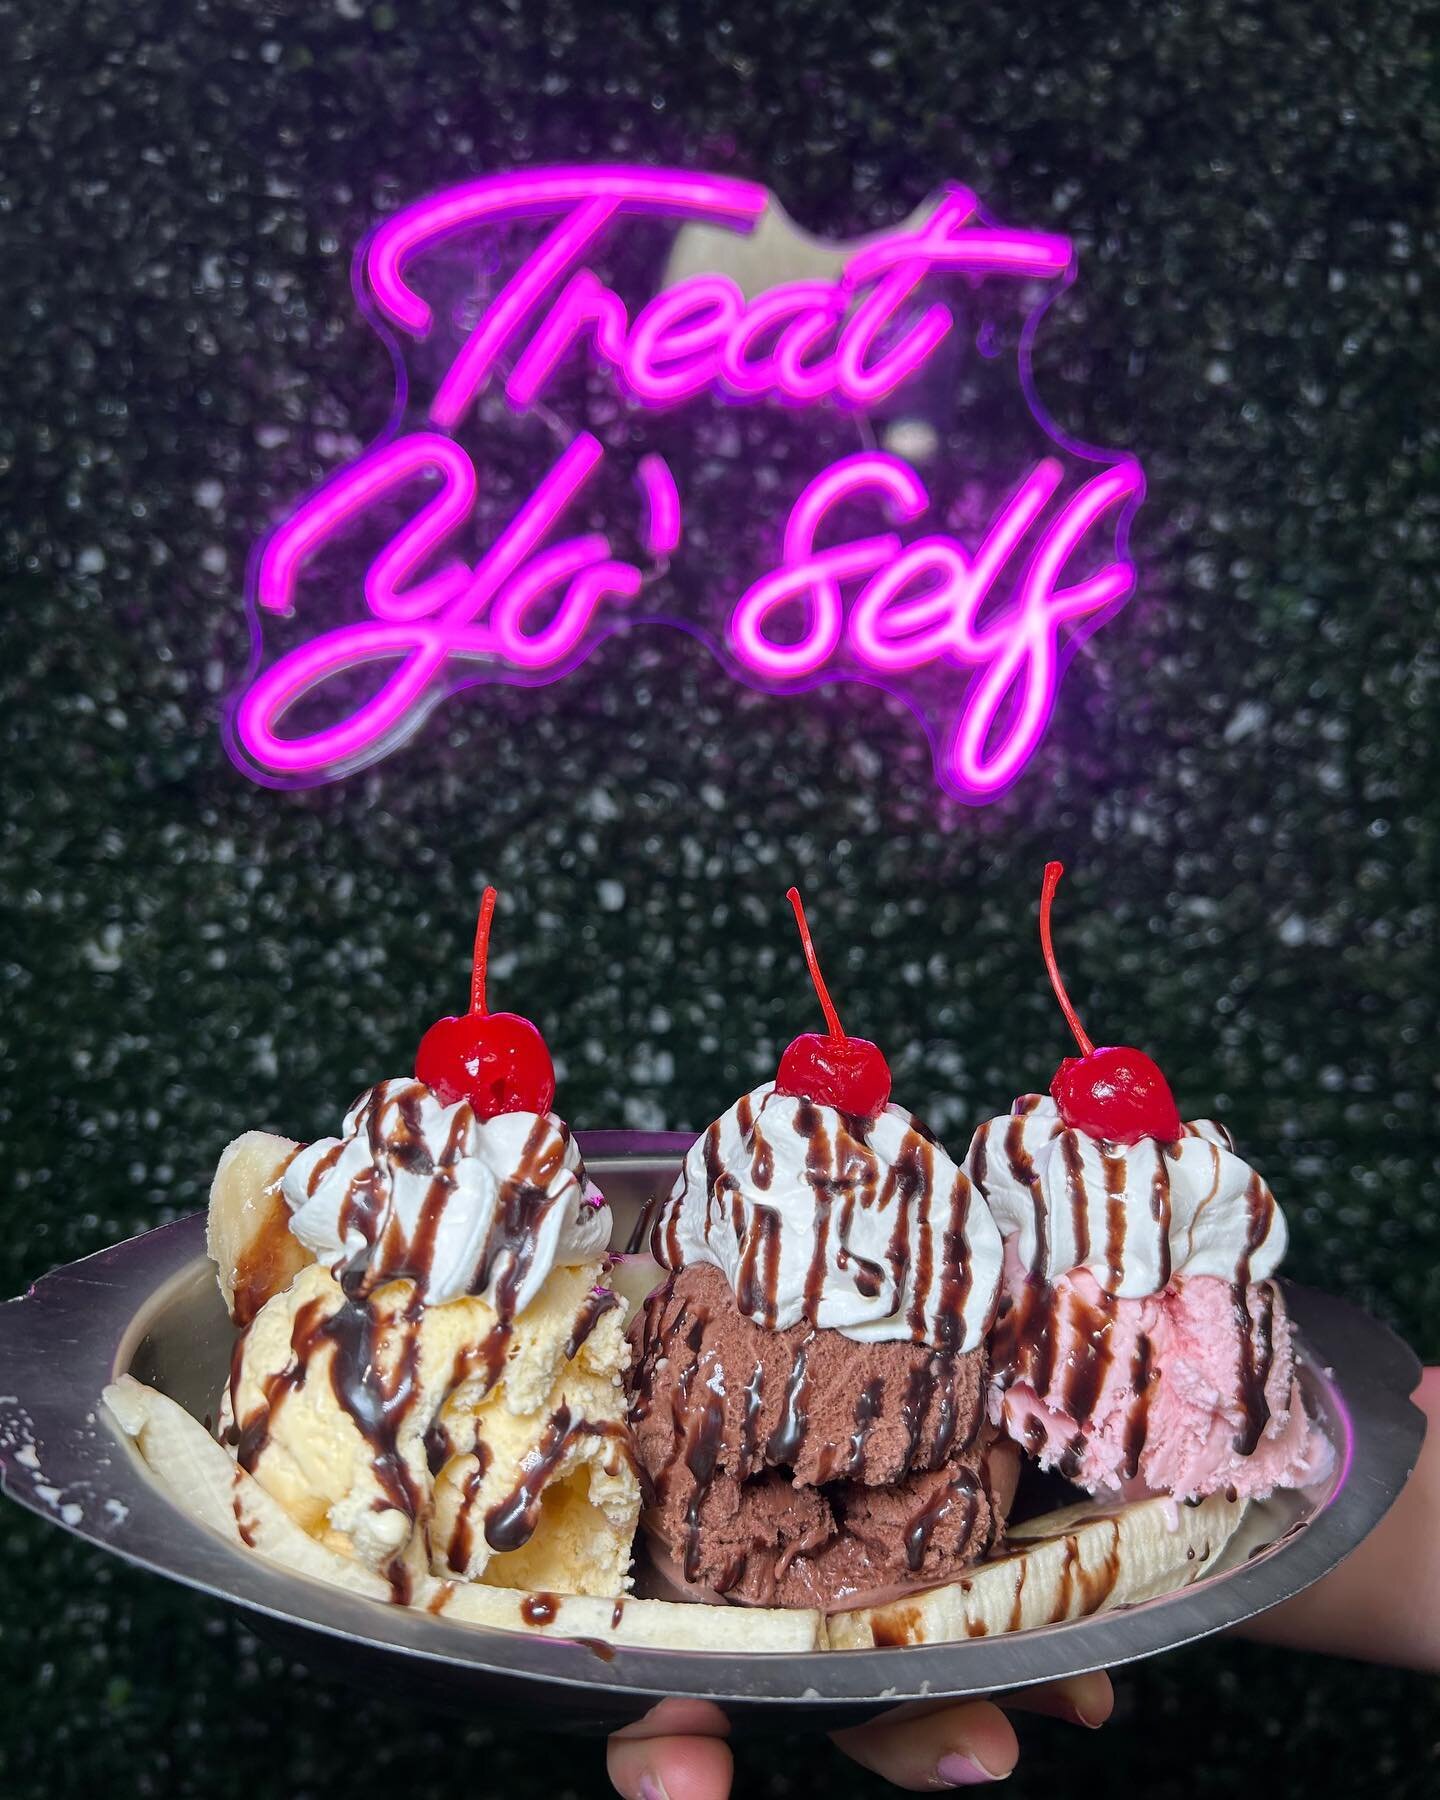 We take ✨treat yourself✨ very seriously at scoops and cones!
Old fashion banana split😍🍌